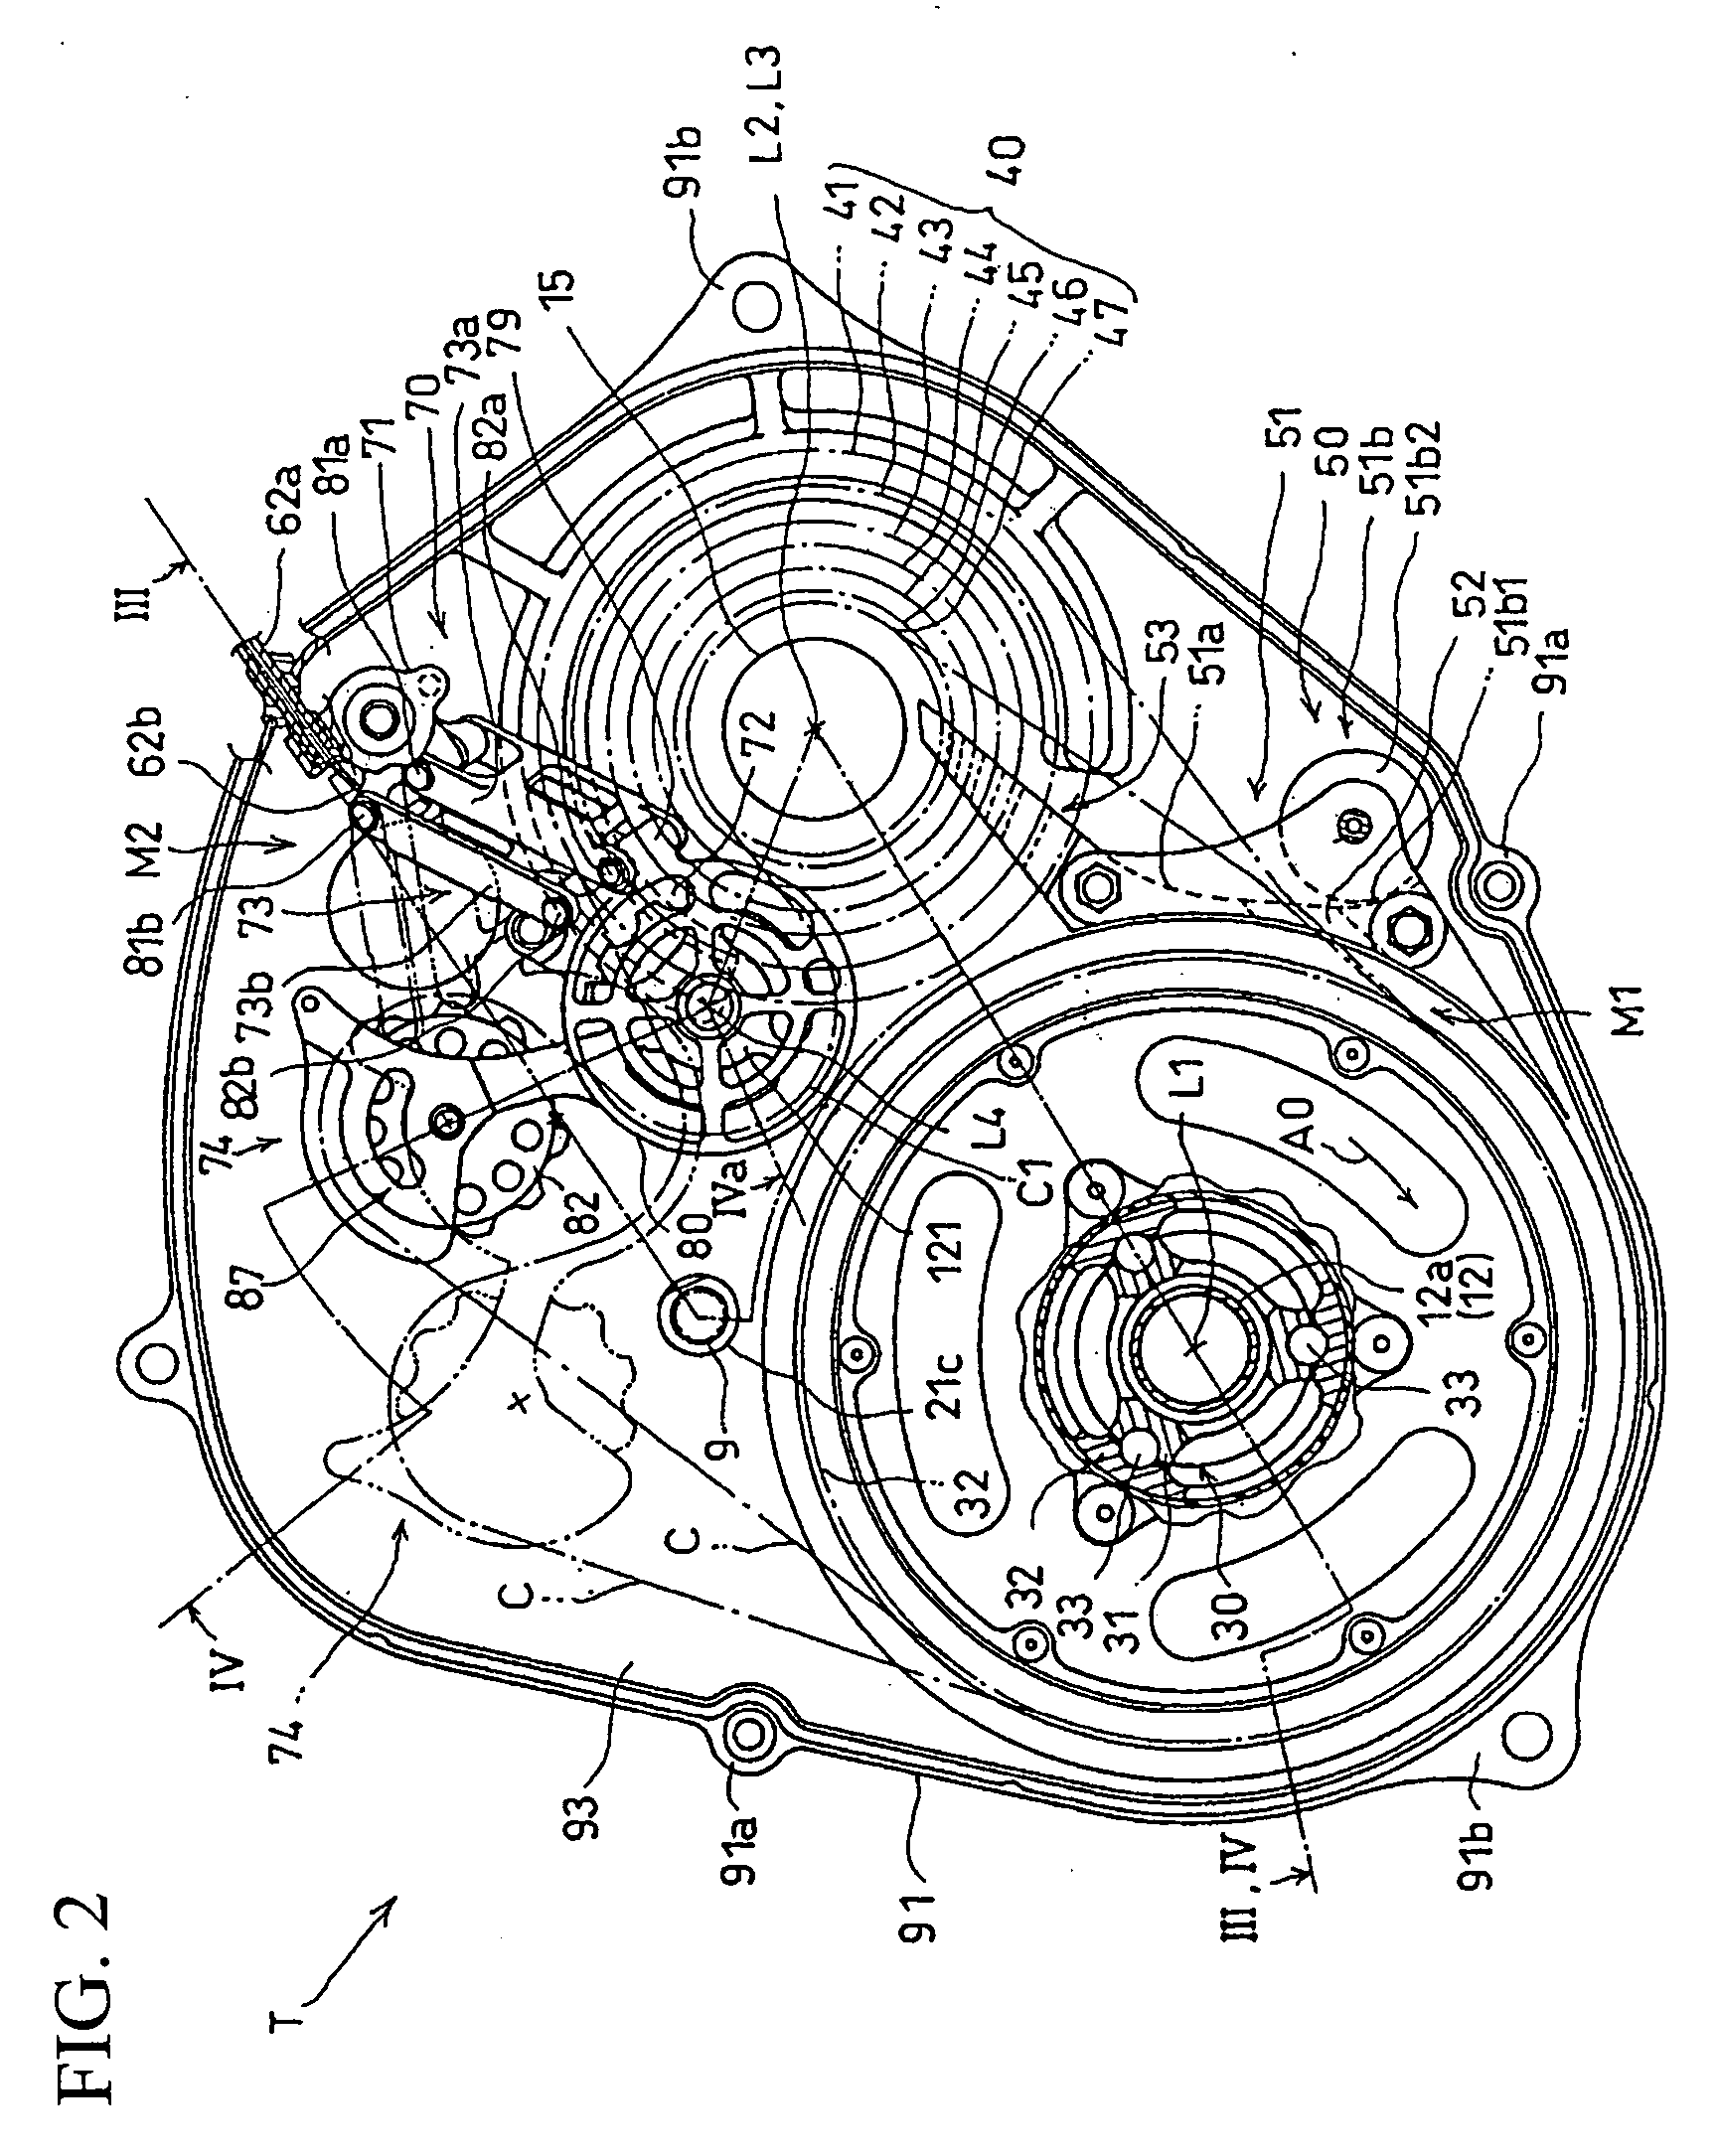 Transmission with internal protective shield and bicycle incorporating same